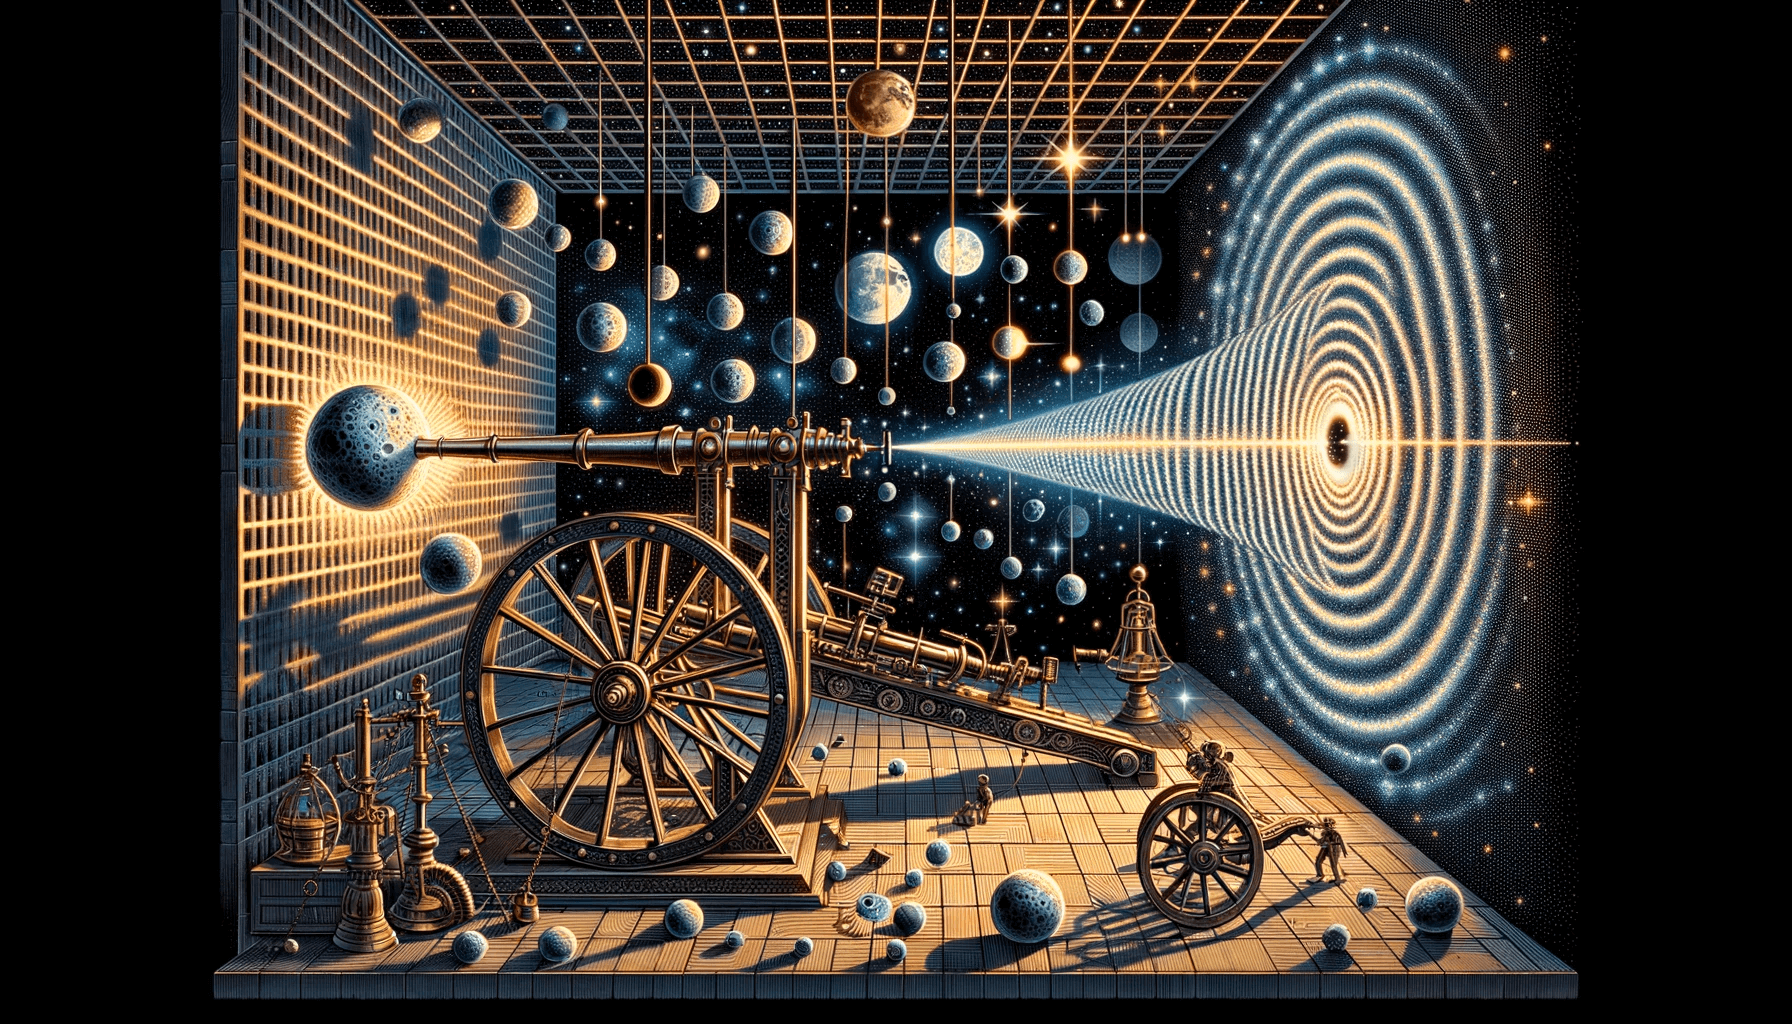 The image depicts an experiment in which heavy particles (illustrated as the moon), cause an interference pattern (a quantum effect), while also bending spacetime